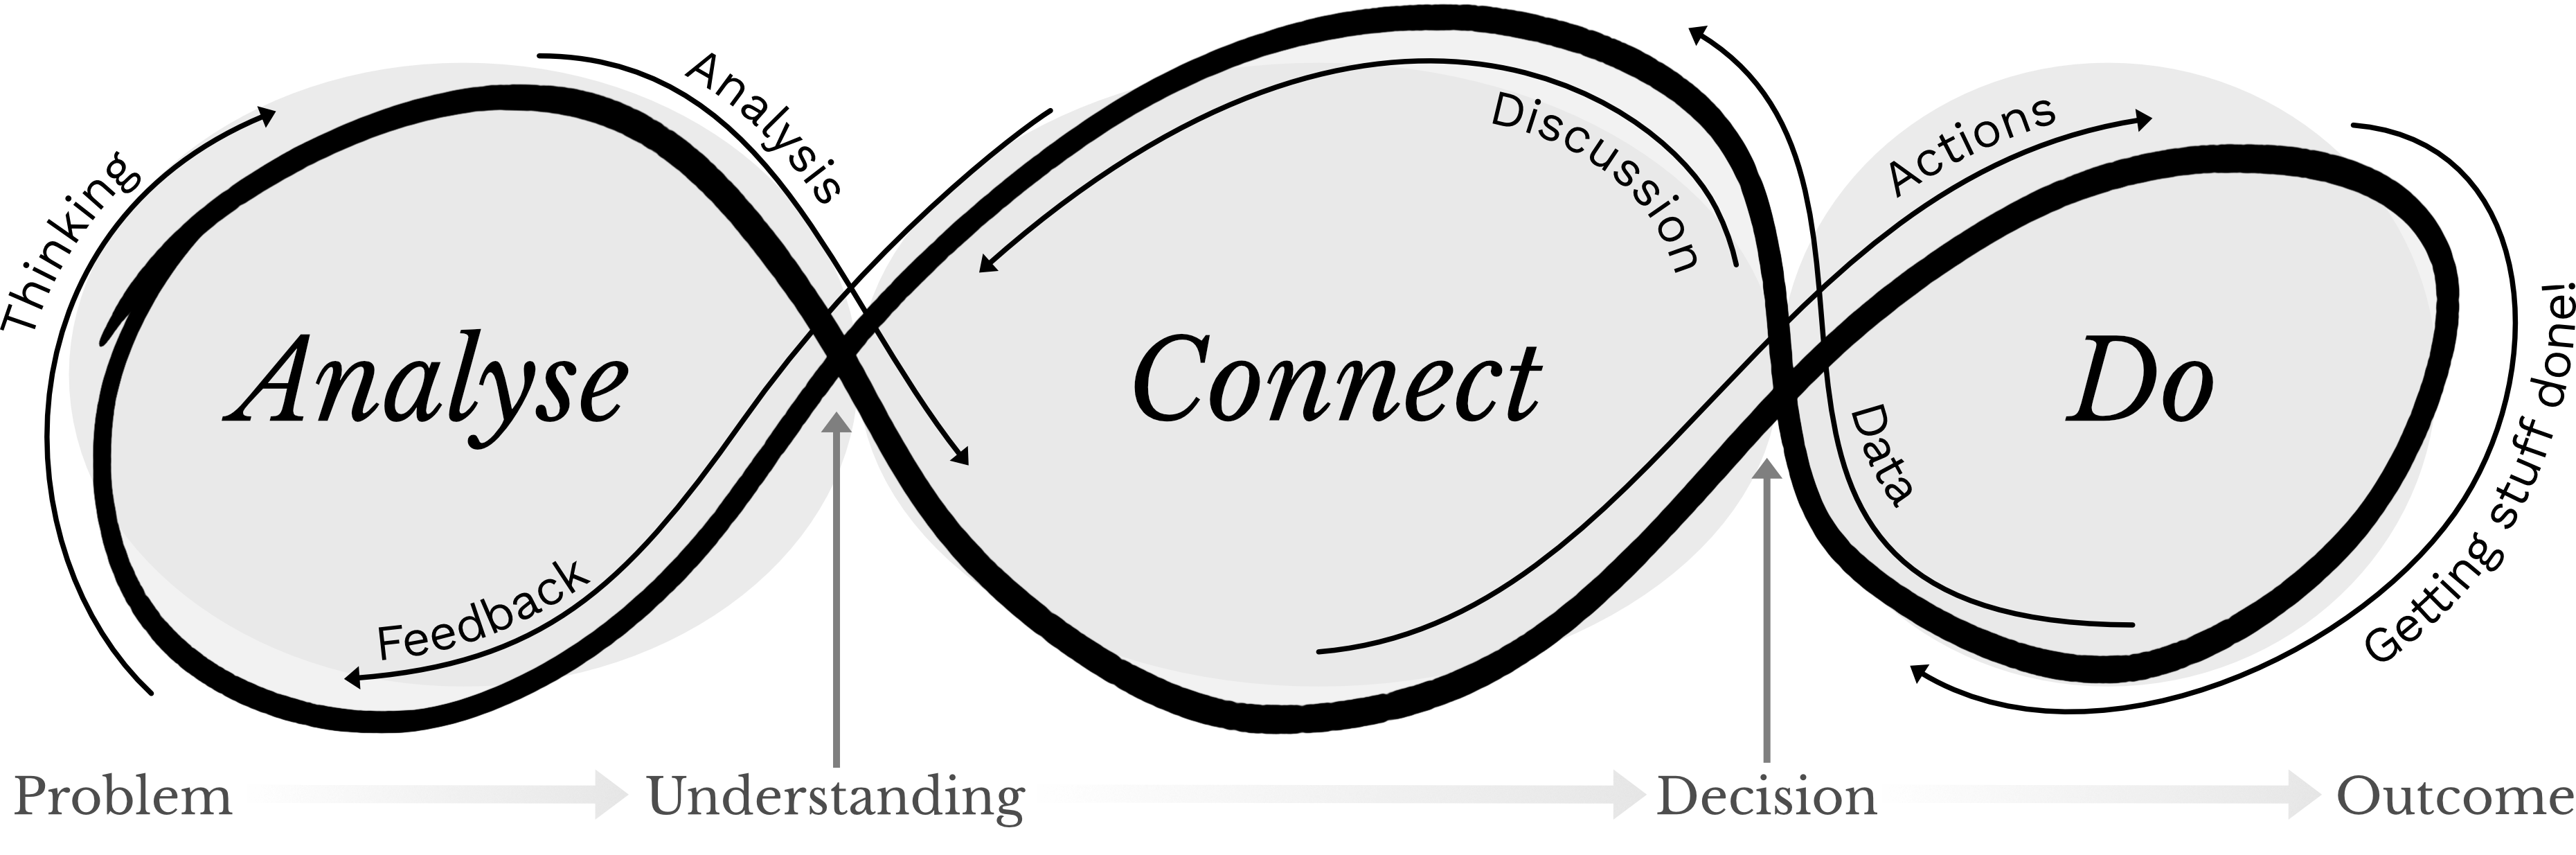 The graphic illustration of the Jimmy Approach shows three circular areas labeled, from left to right, Analyse, Connect, and Do. Looping around these three areas is a thick black line indicating that this processes is iterative.